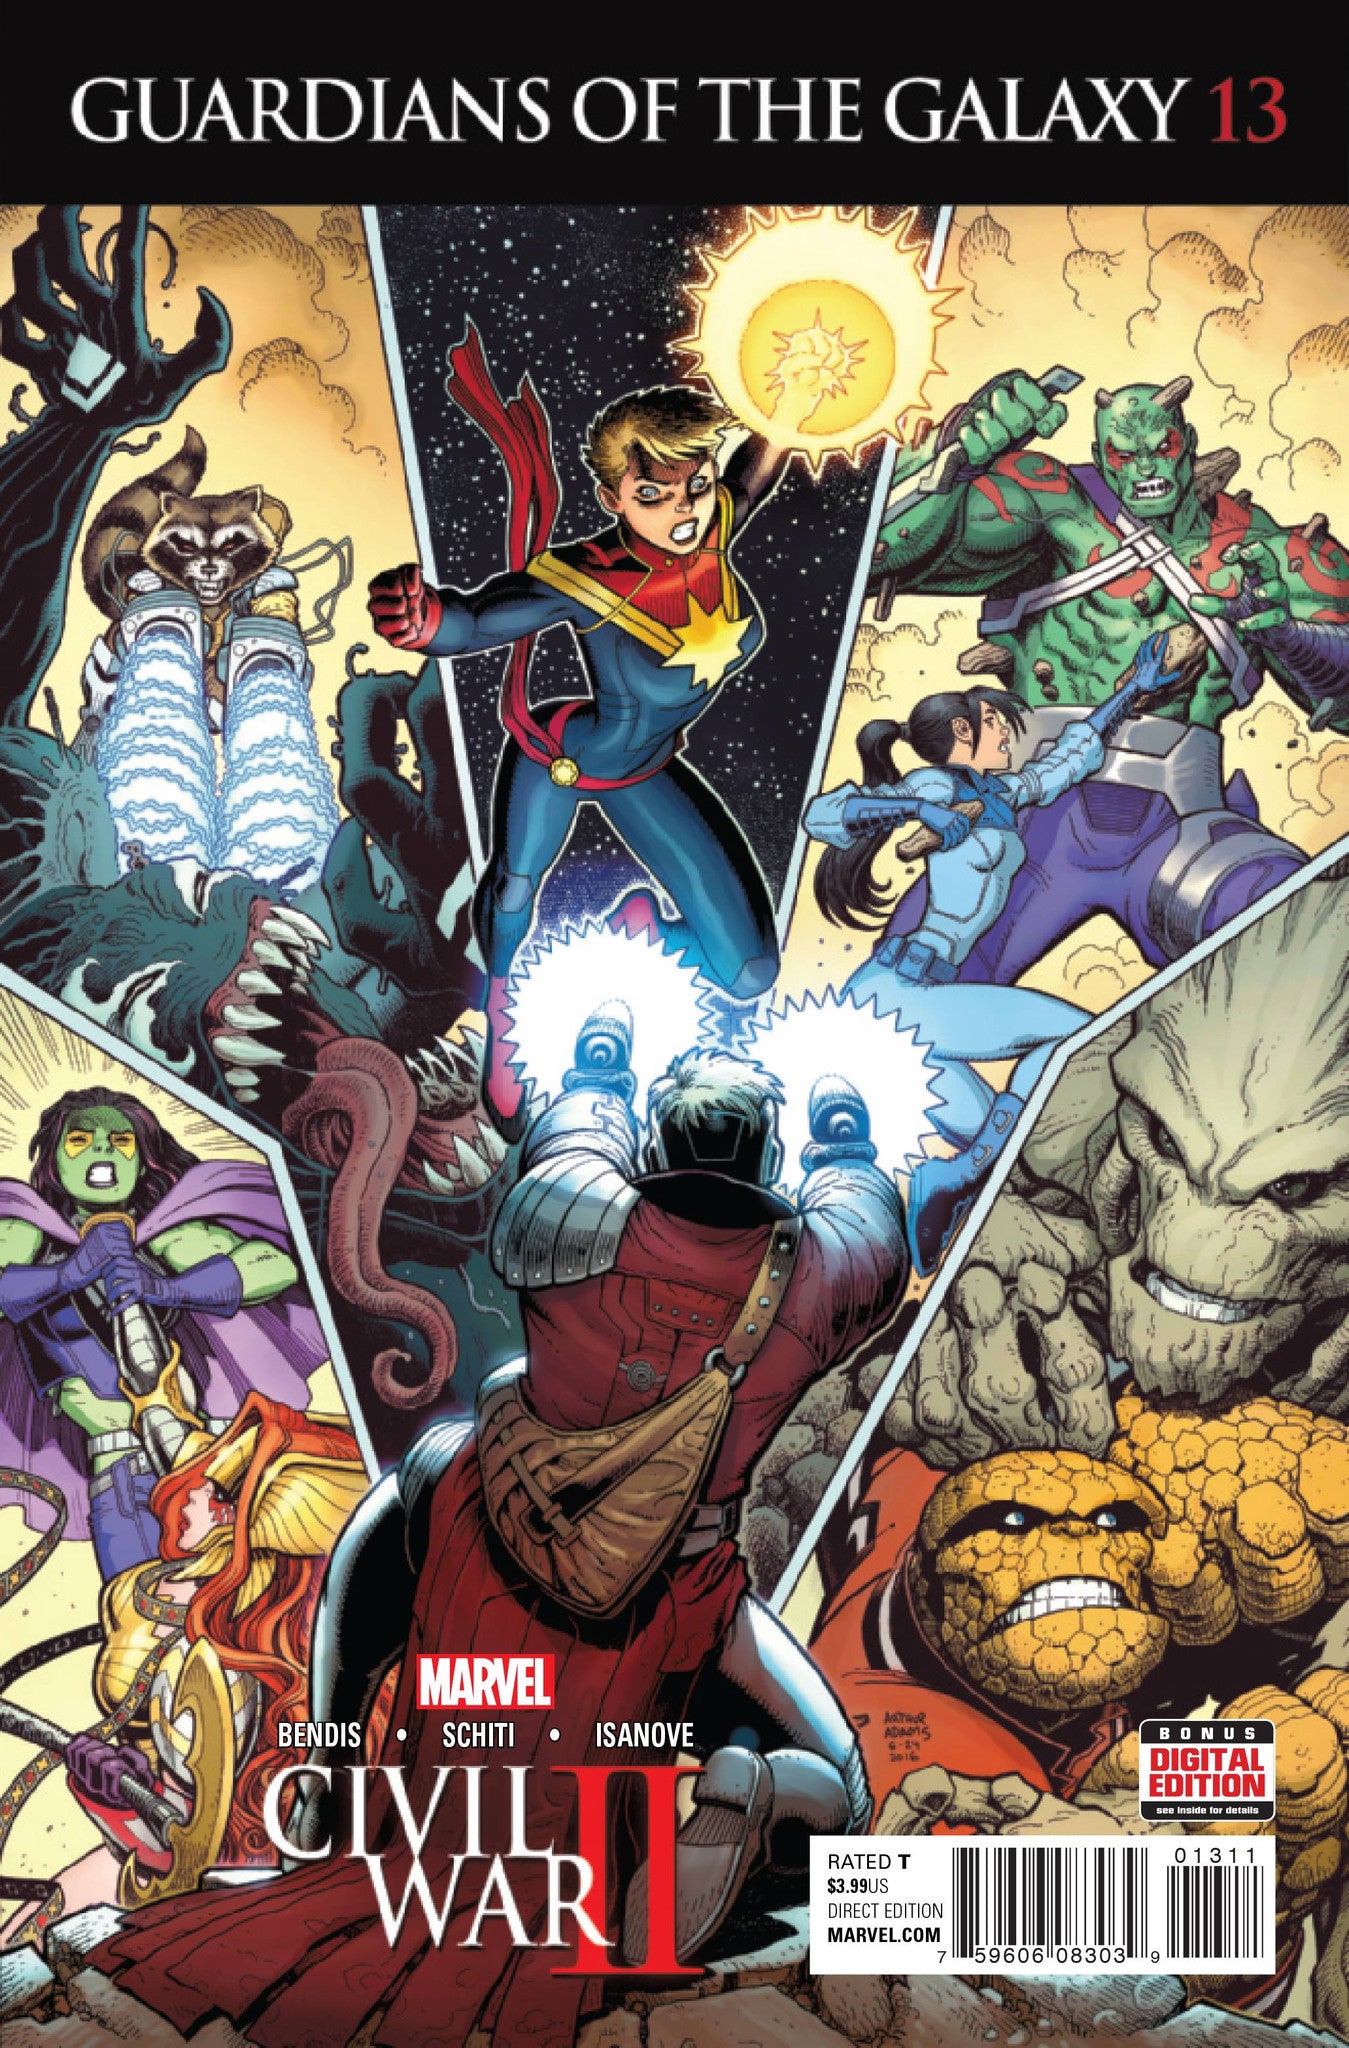 GUARDIANS OF GALAXY #13 CW2 COVER